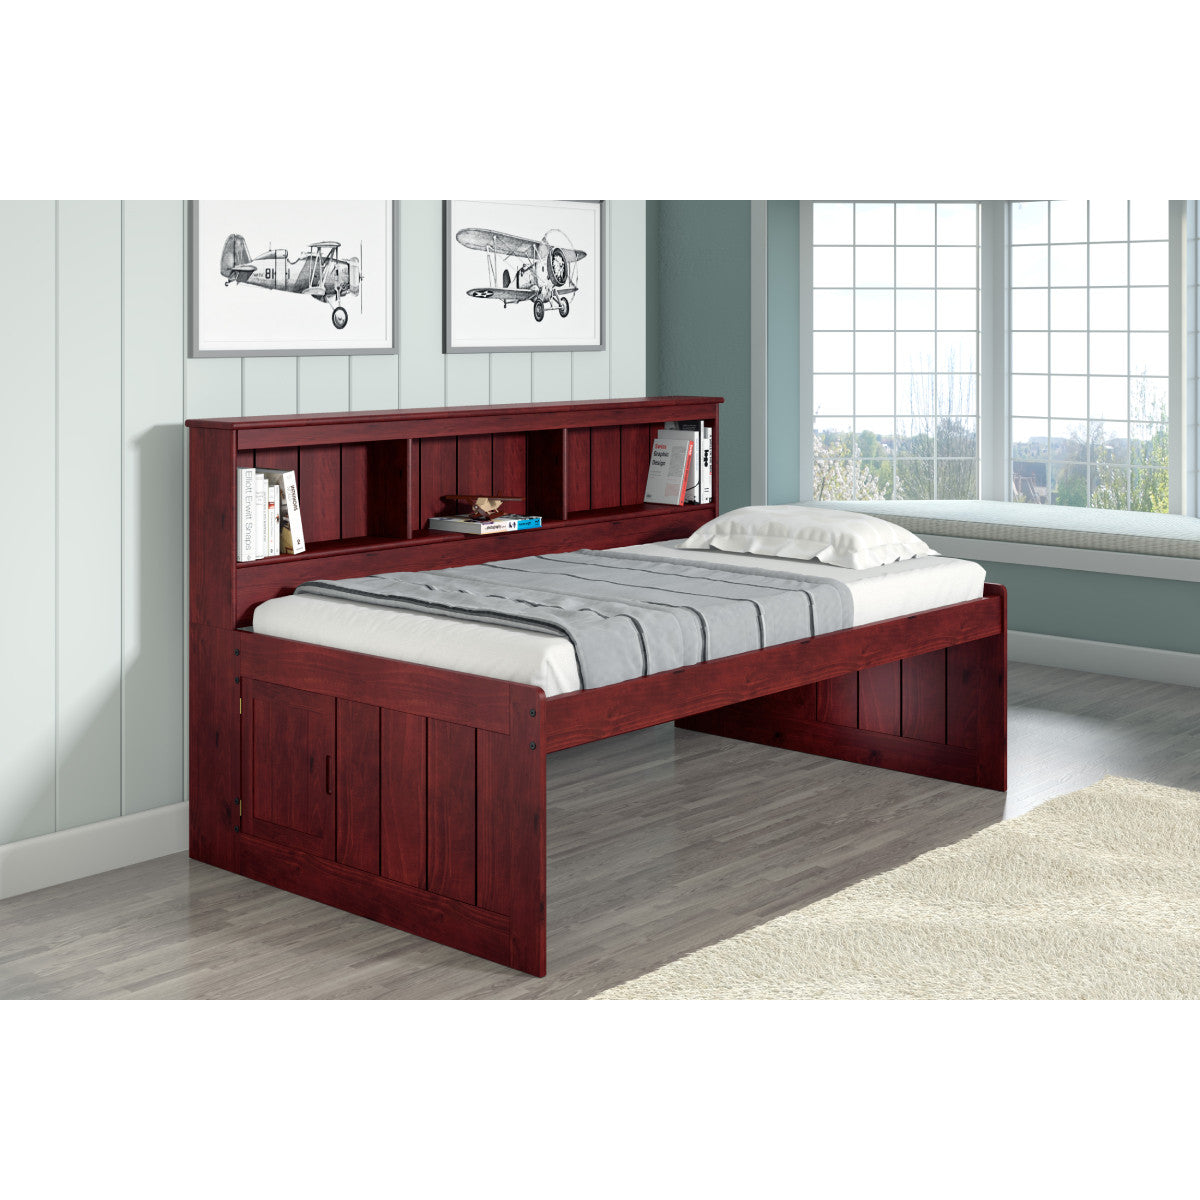 TWIN DAYBED BOOKCASE BED MERLOT